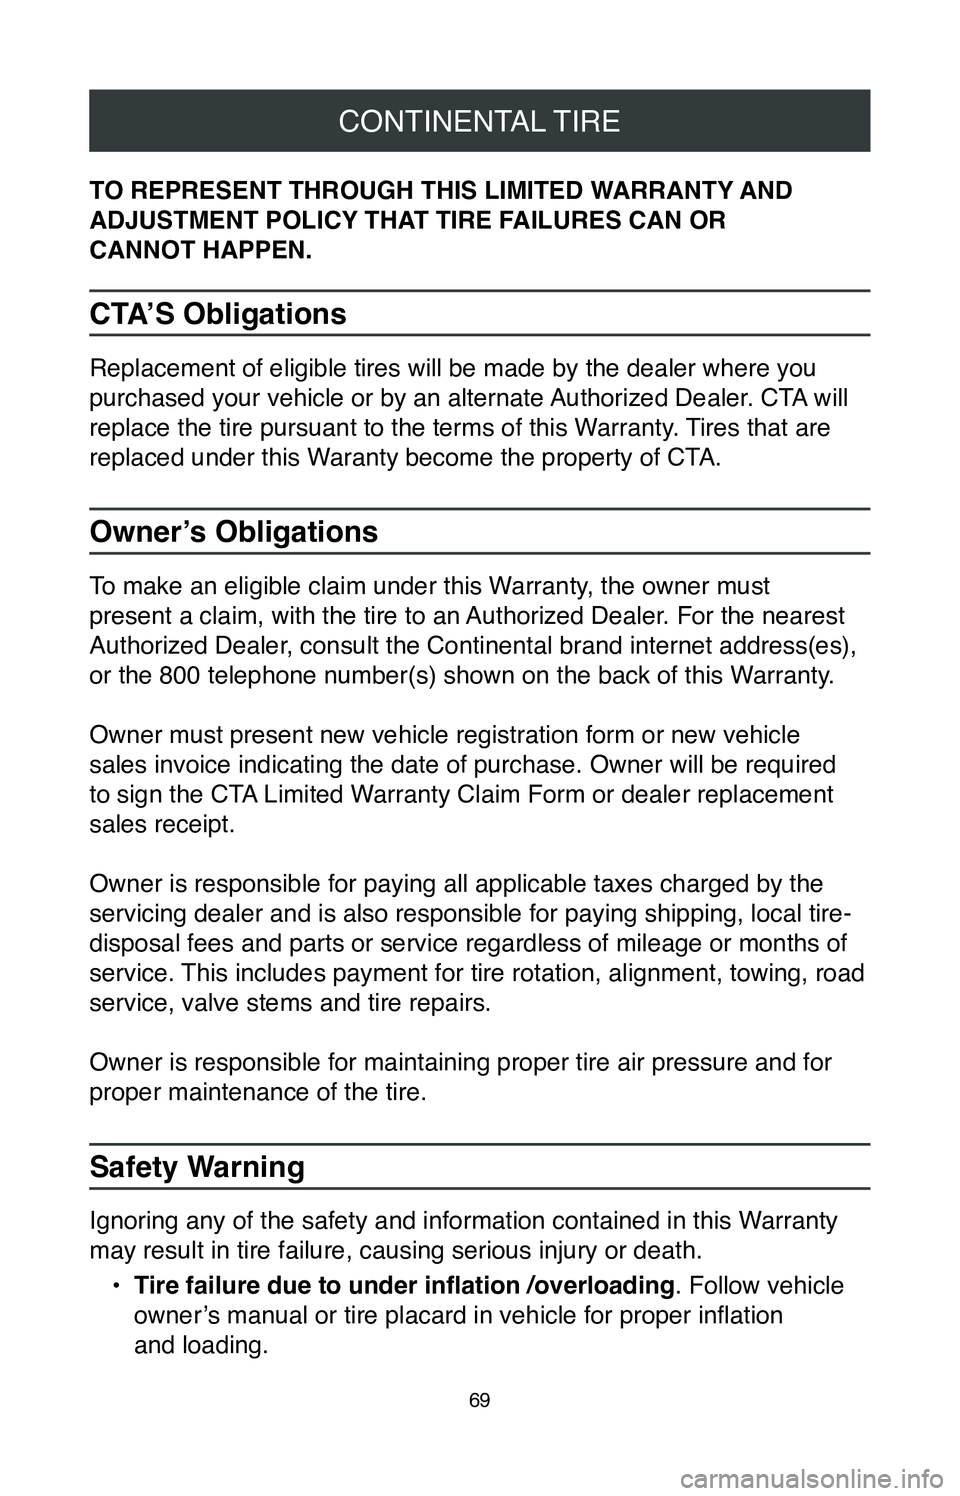 TOYOTA LAND CRUISER 2020  Warranties & Maintenance Guides (in English) CONTINENTAL TIRE
69
TO REPRESENT THROUGH THIS LIMITED WARRANTY AND 
ADJUSTMENT POLICY THAT TIRE FAILURES CAN OR  
CANNOT HAPPEN.
CTA’S Obligations
Replacement of eligible tires will be made by the d